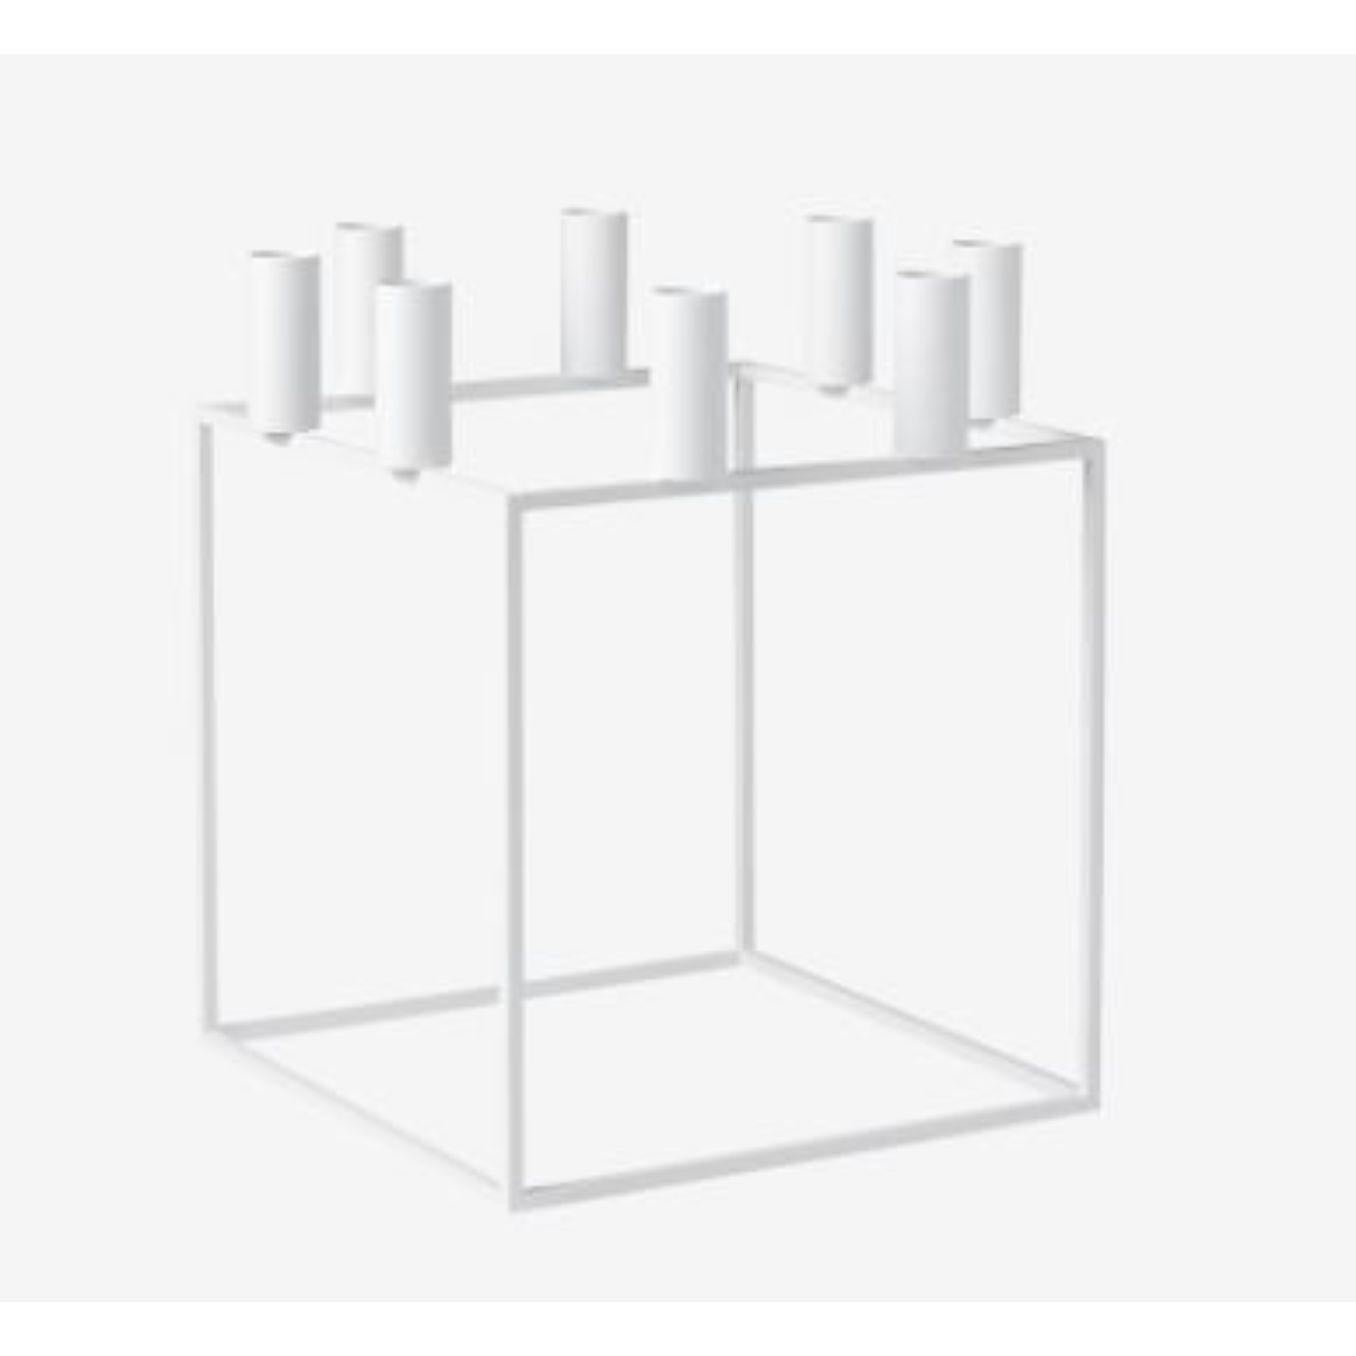 White Kubus 8 candle holder by Lassen
Dimensions: D 23 x W 23 x H 29 cm 
Materials: Metal 
Also available in different dimensions.
Weight: 1.50 Kg

With a sharp sense of contemporary Functionalist style, Mogens Lassen designed the iconic Kubus